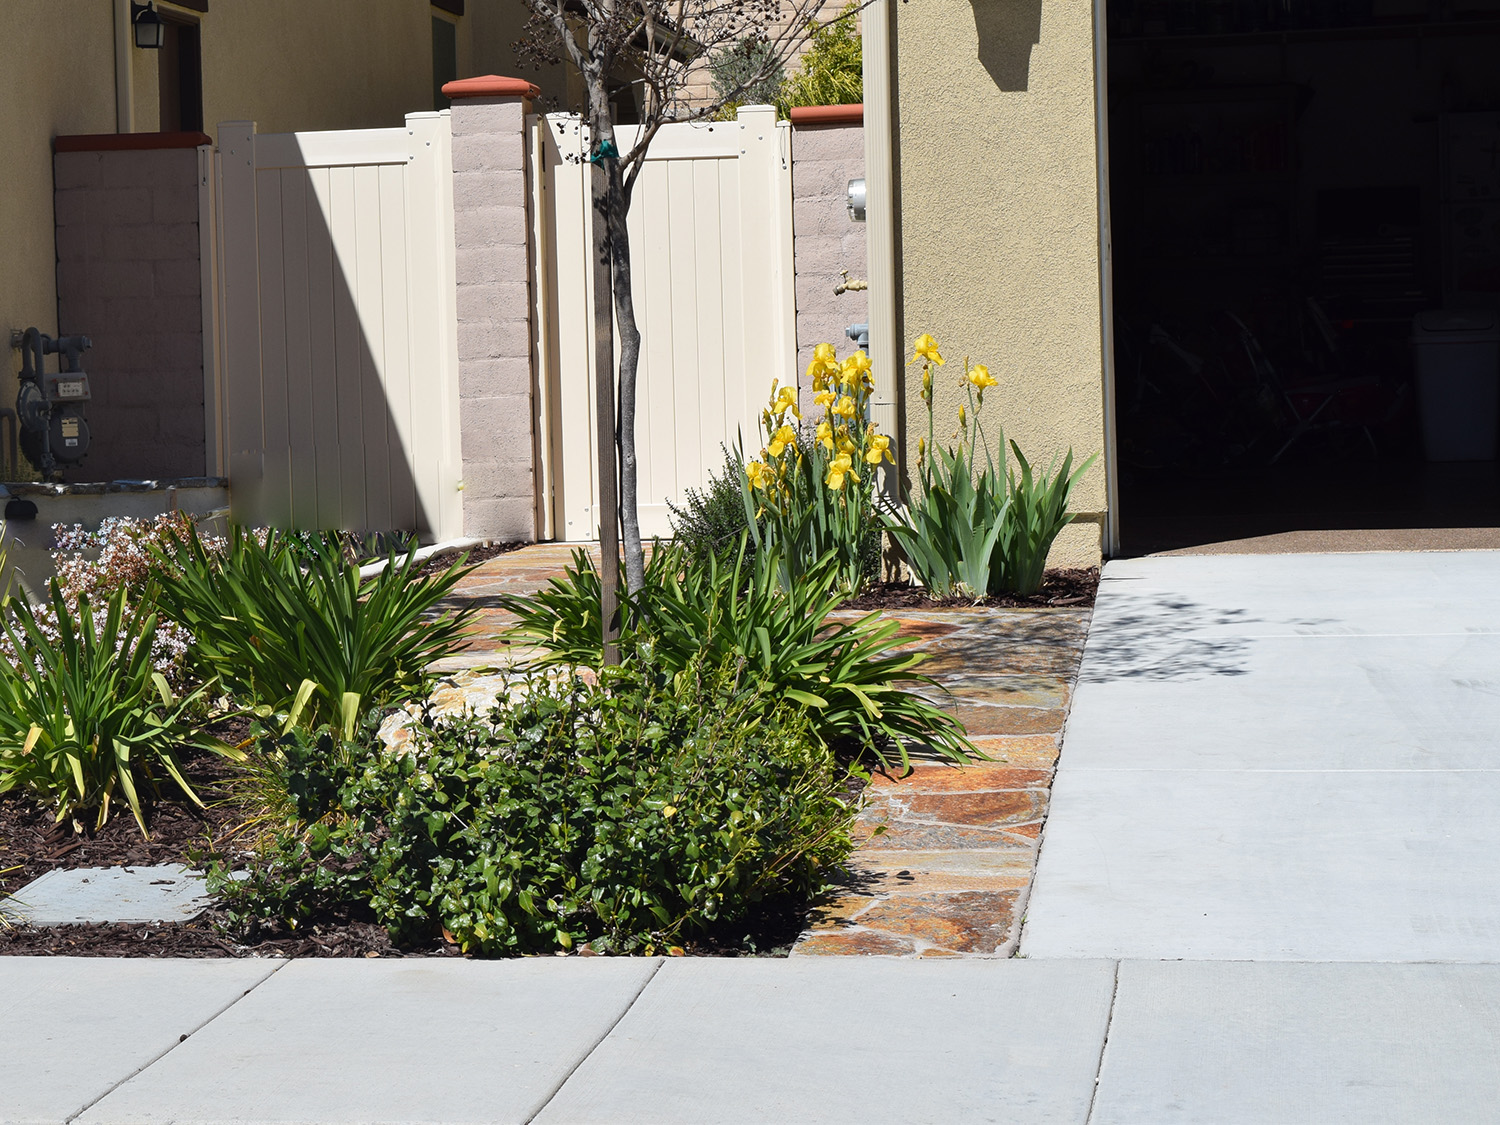 Left side of the driveway - extension with flagstone